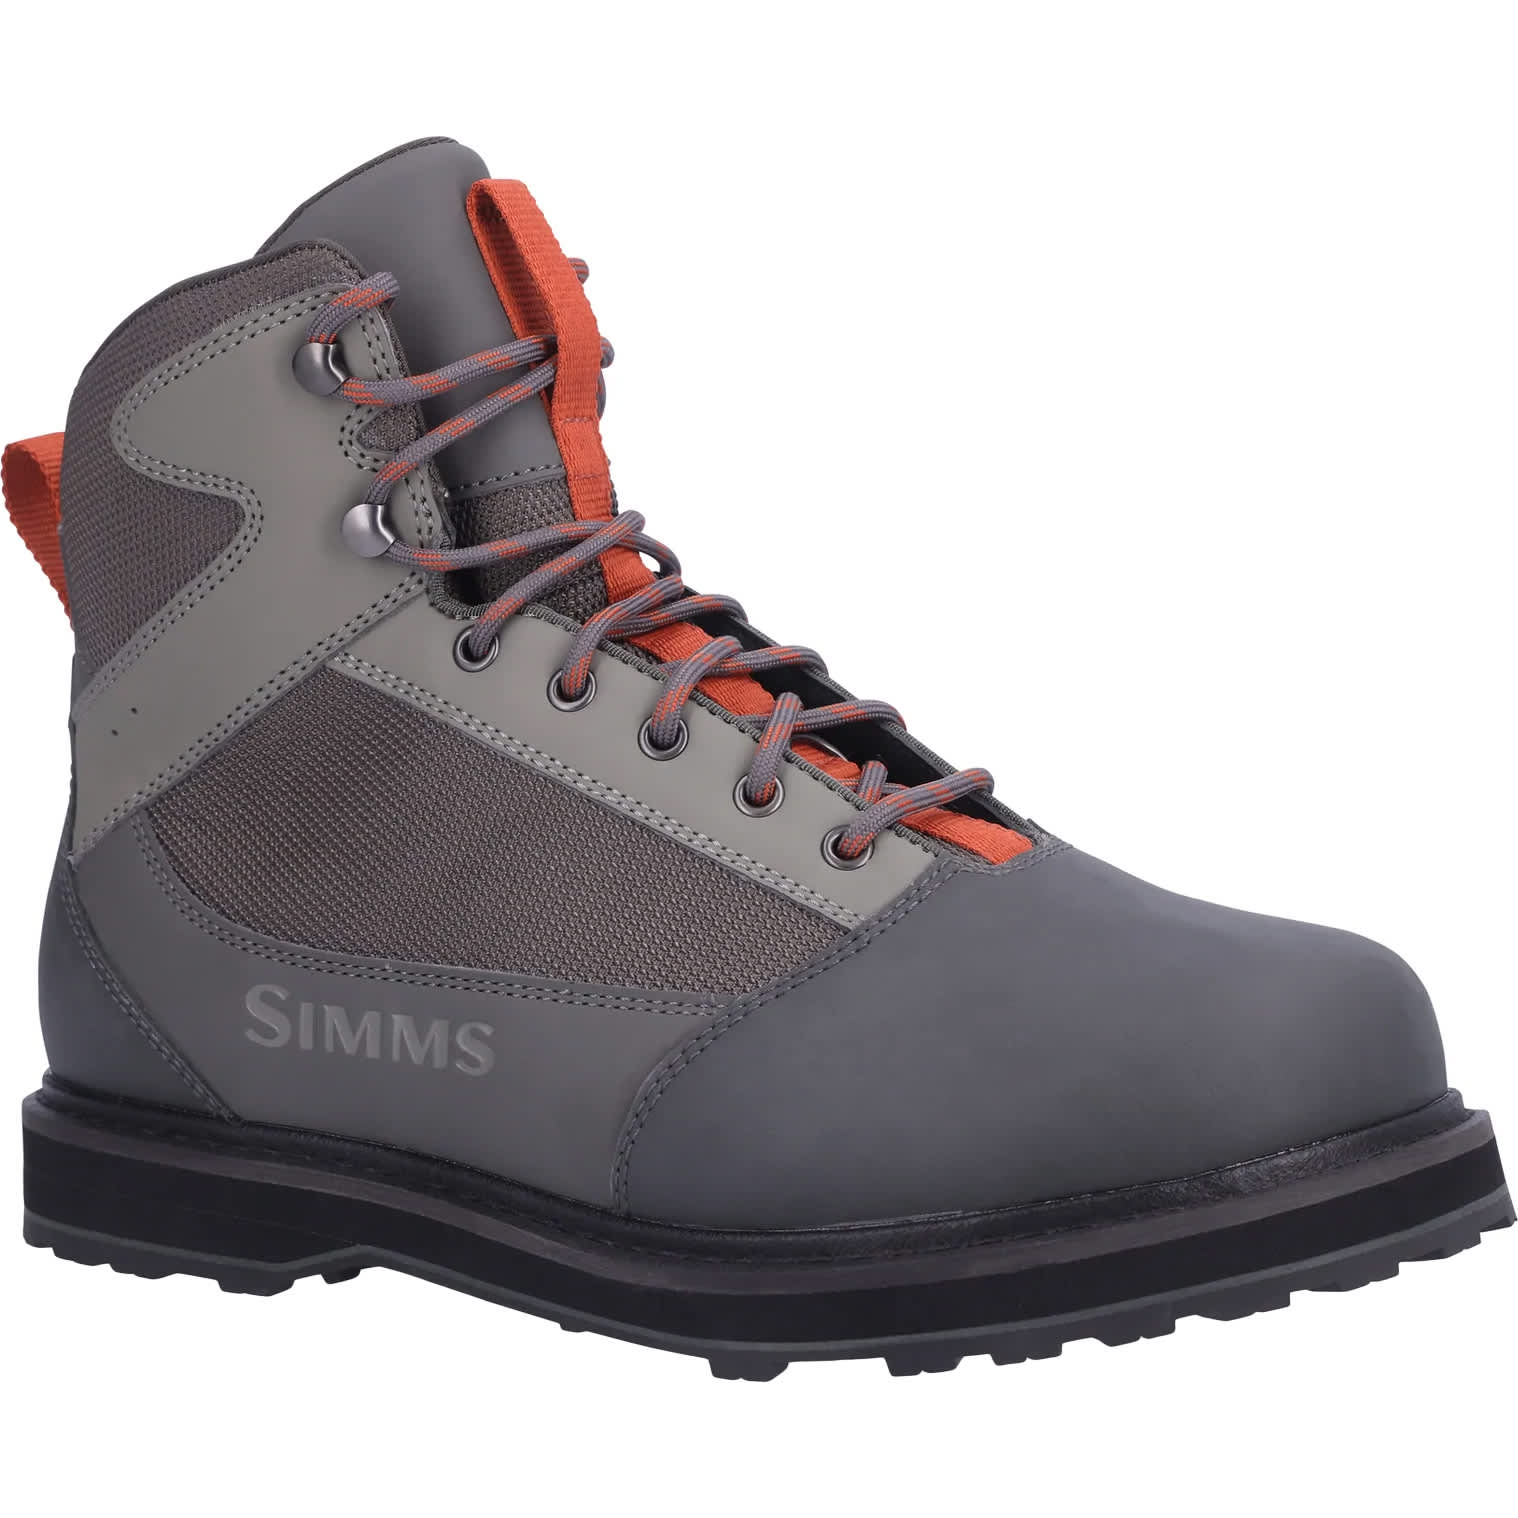 Simms® Men’s Tributary Wading Boot